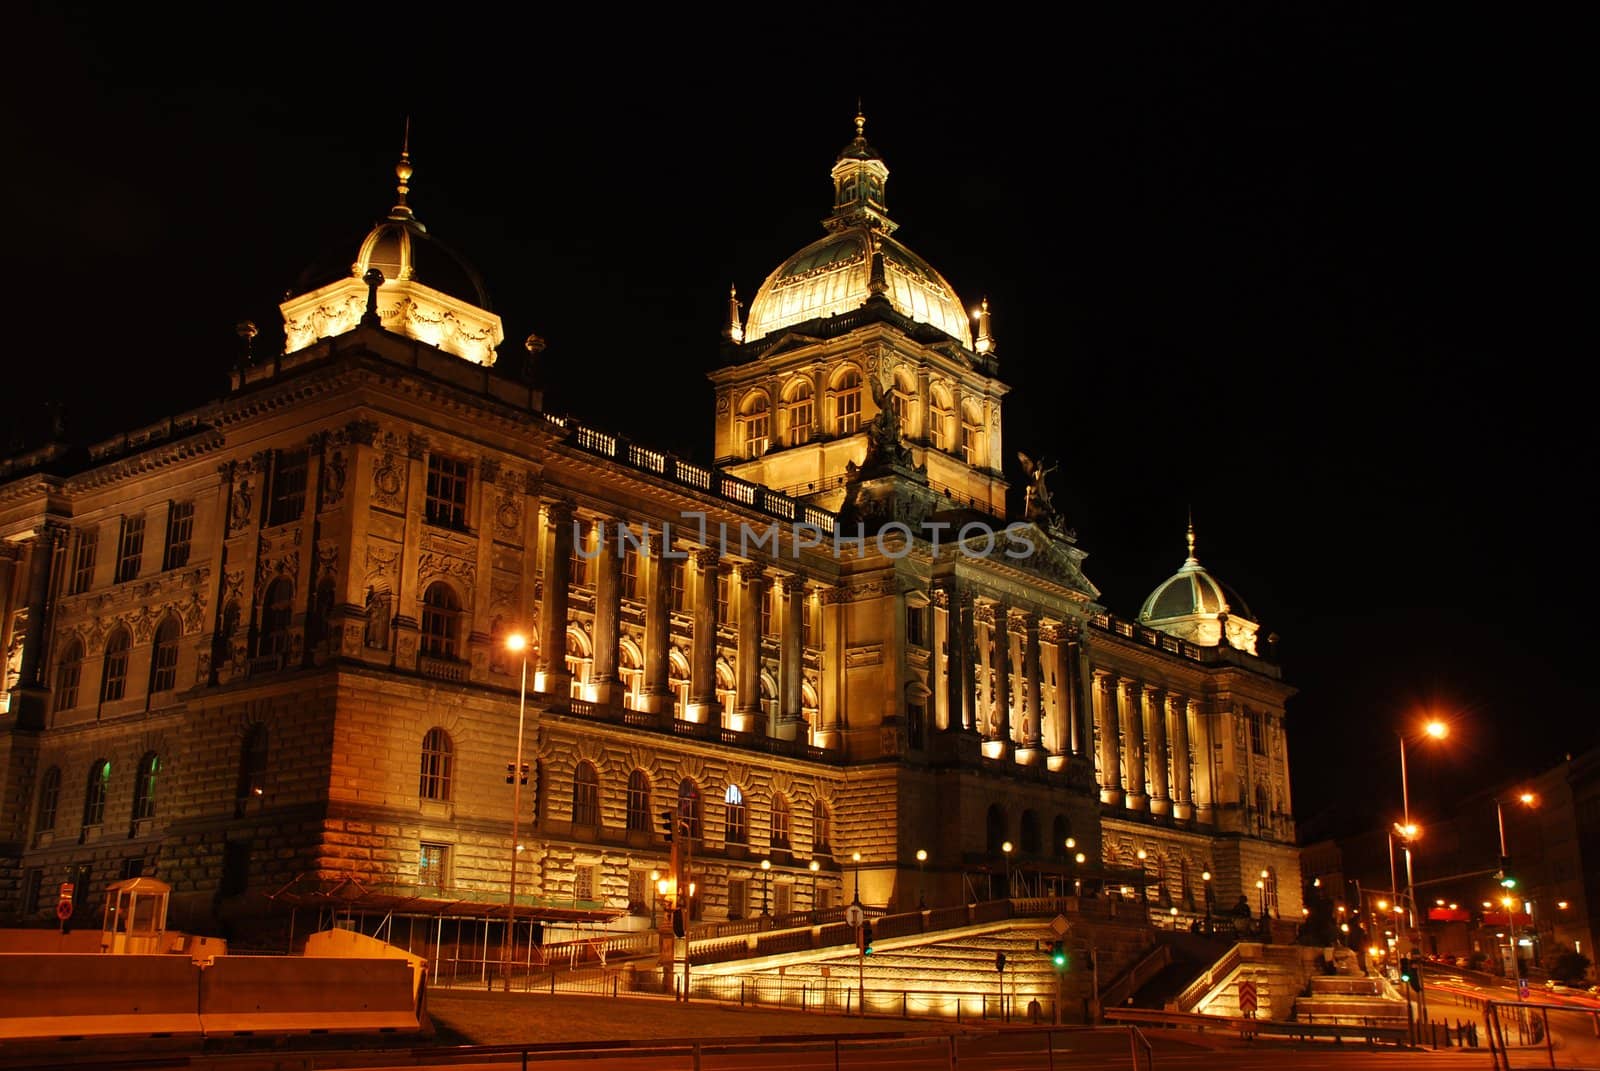 National museum in Prague in the Czech republic - historical building in the middle of the city